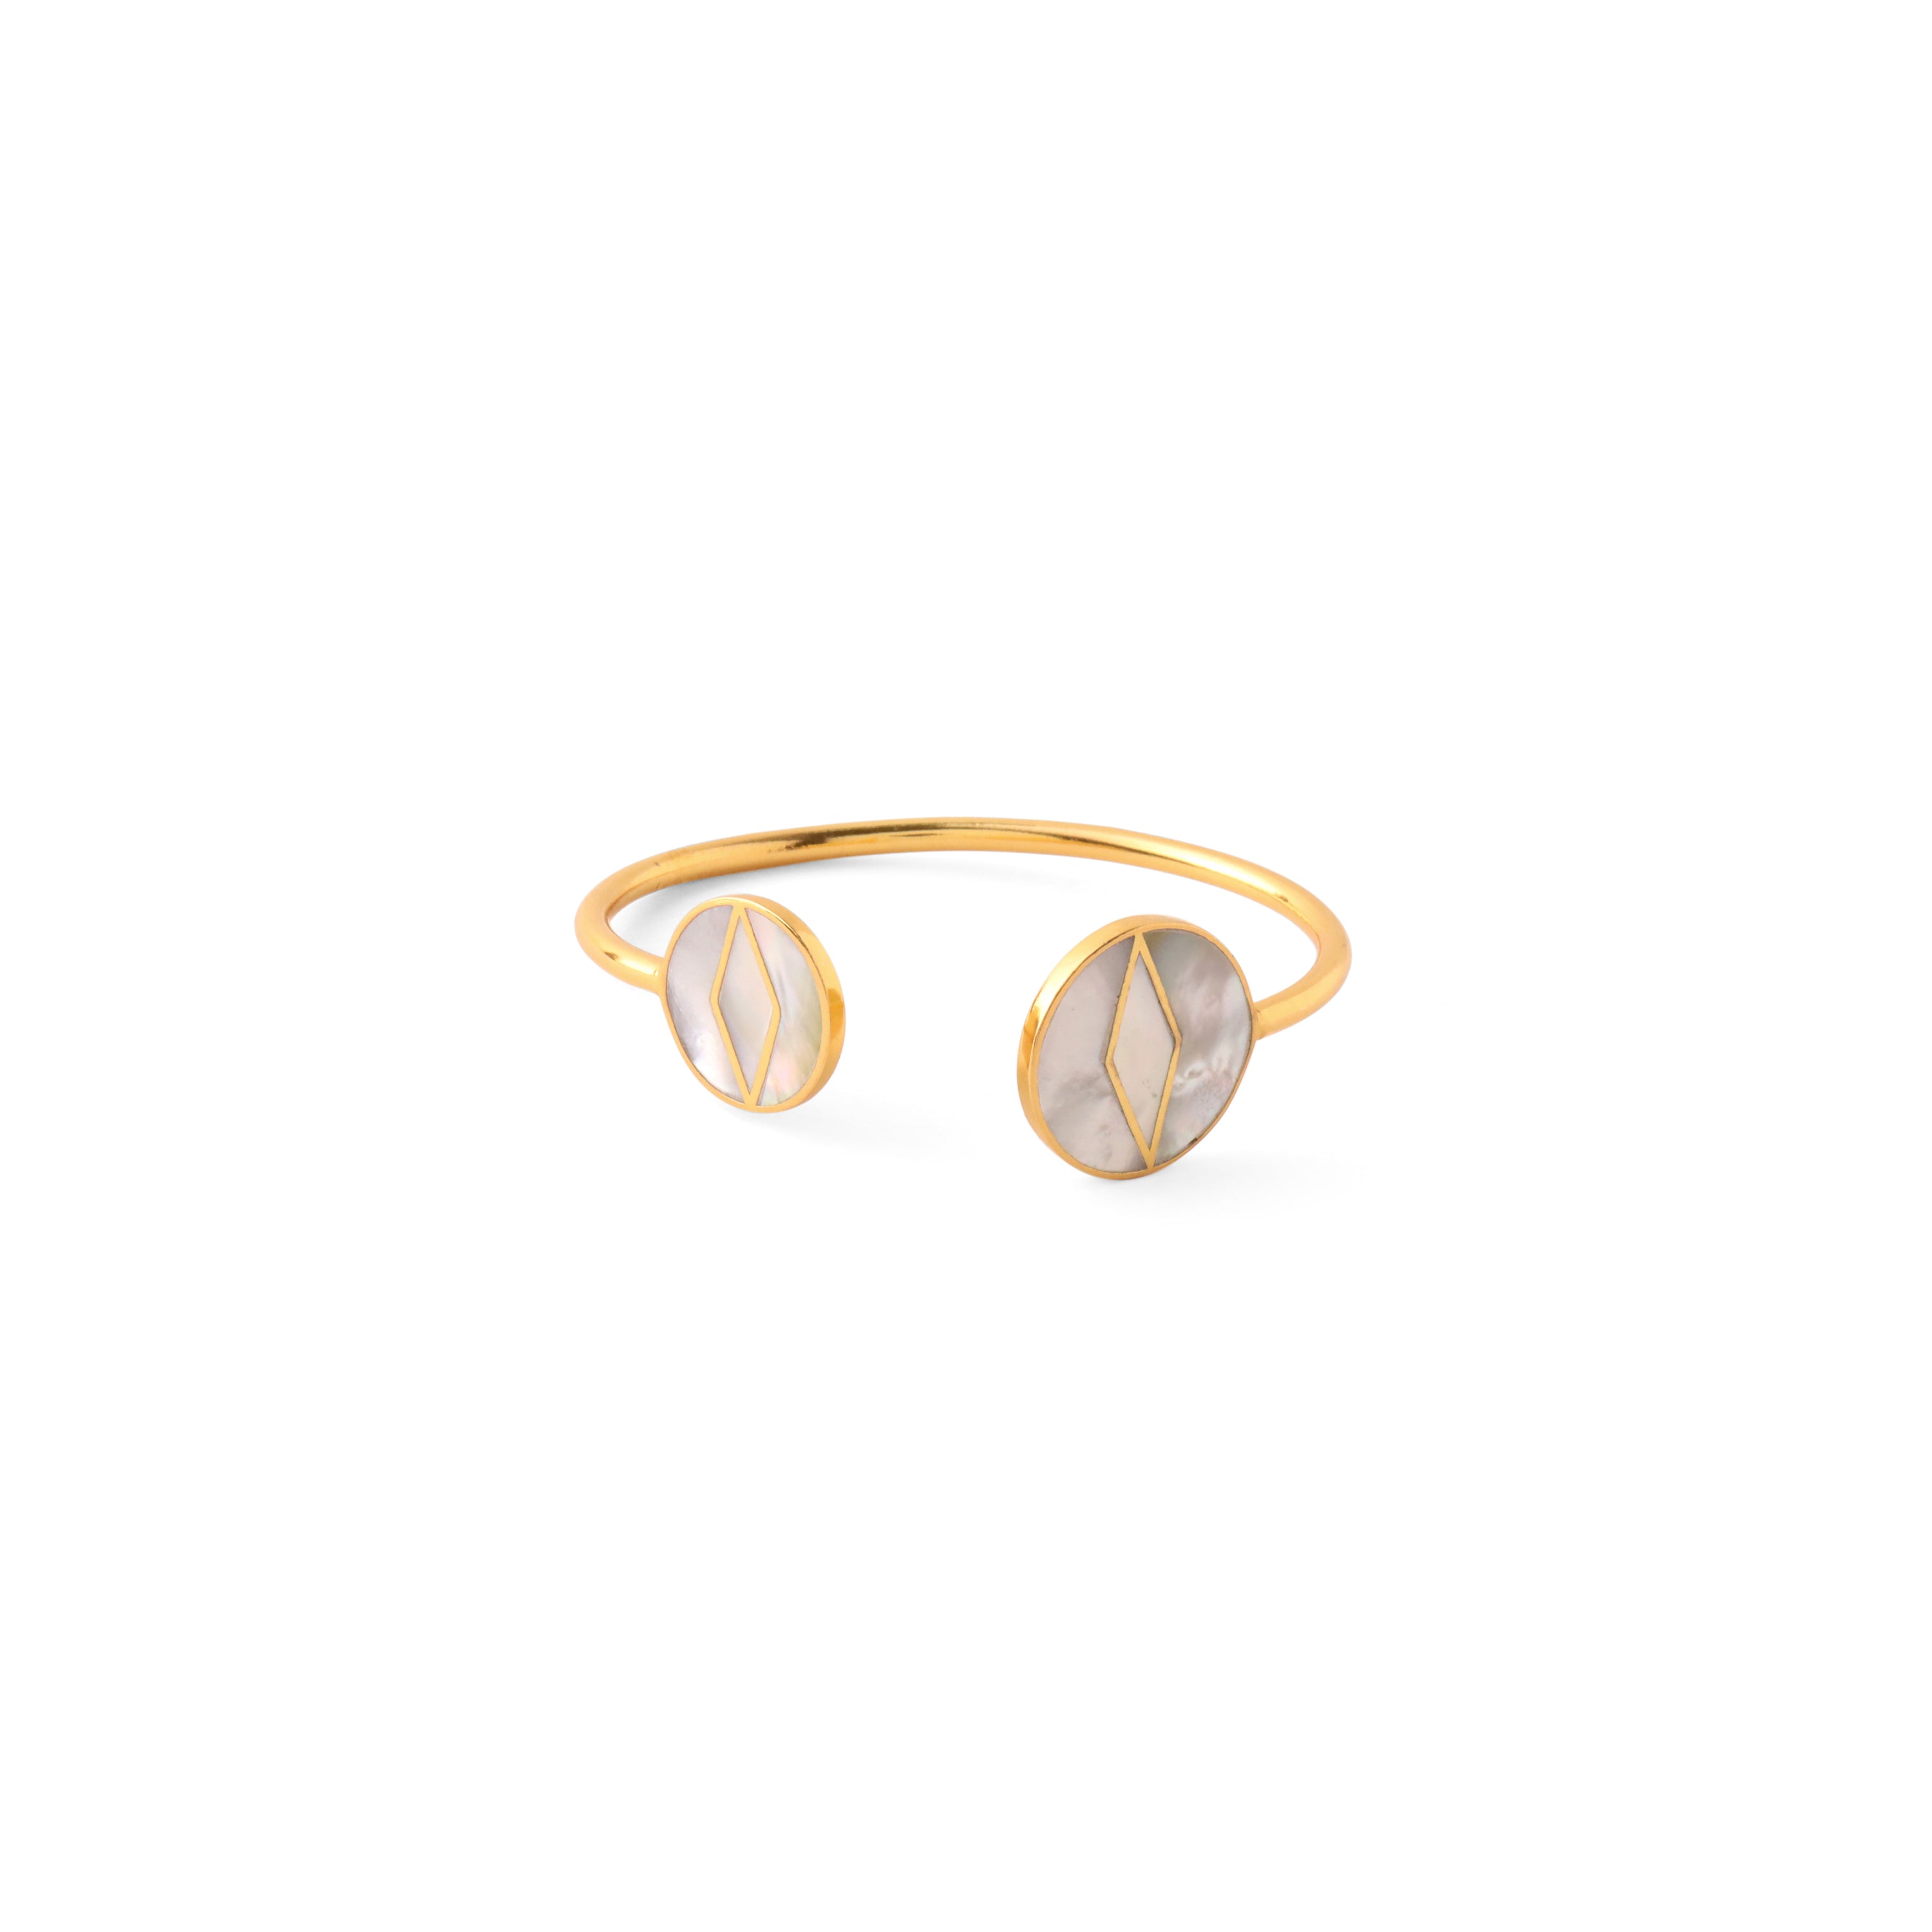 Third eye mother of pearl bangle